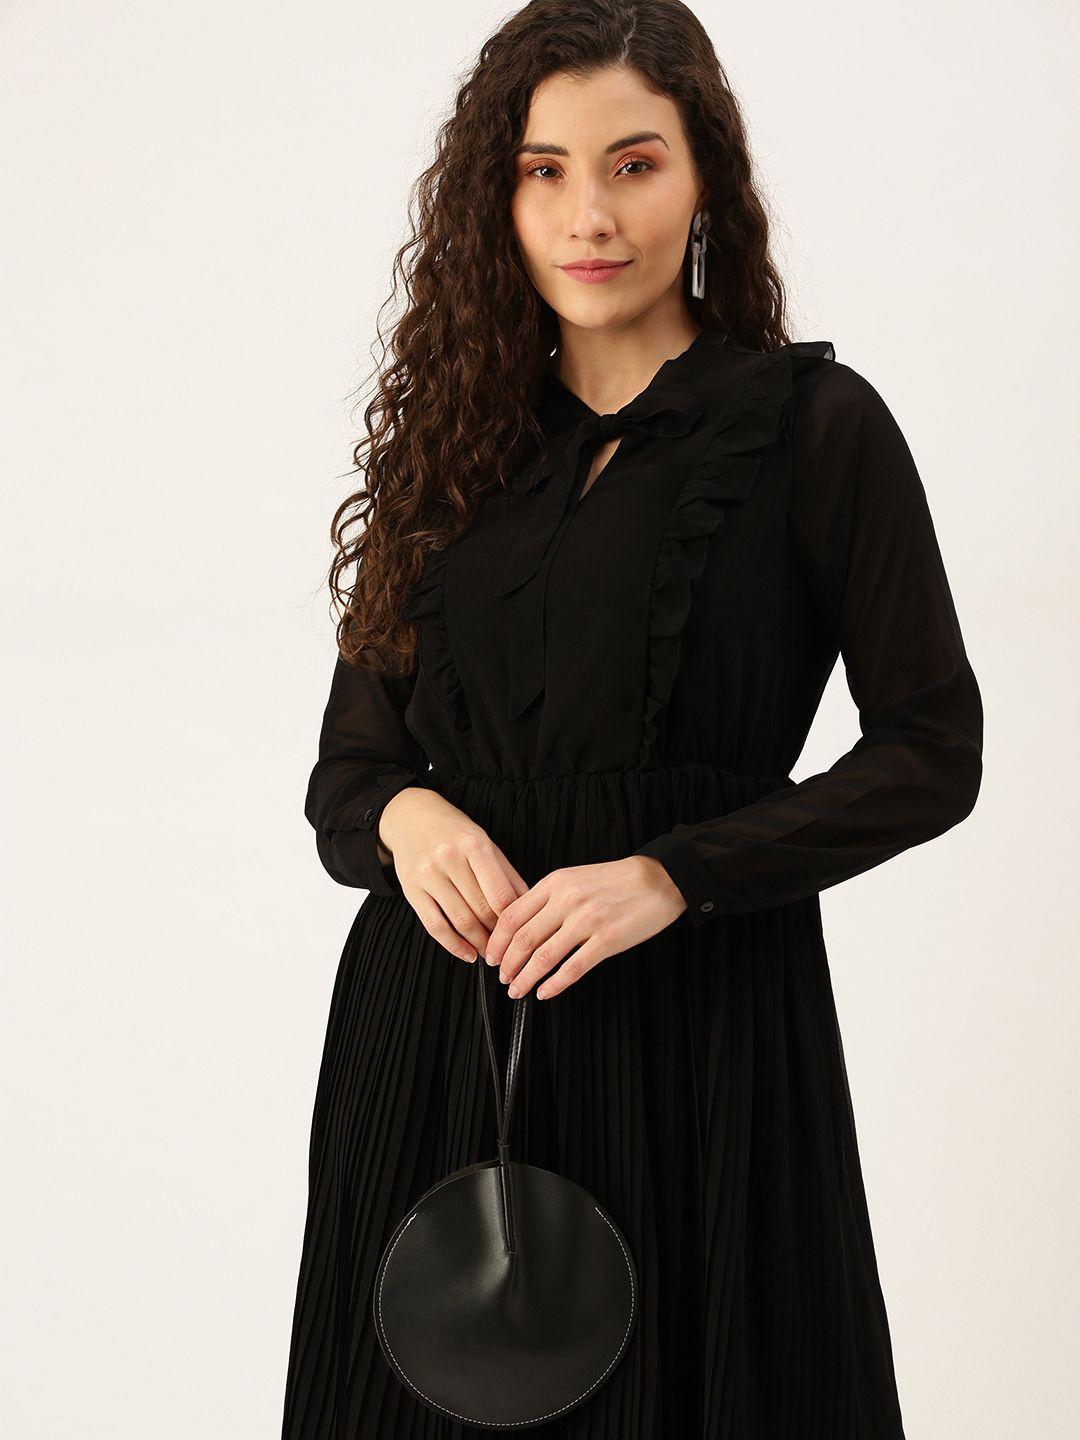 flying machine black tie-up neck cuffed sleeves accordian pleats ruffles fit & flare dress